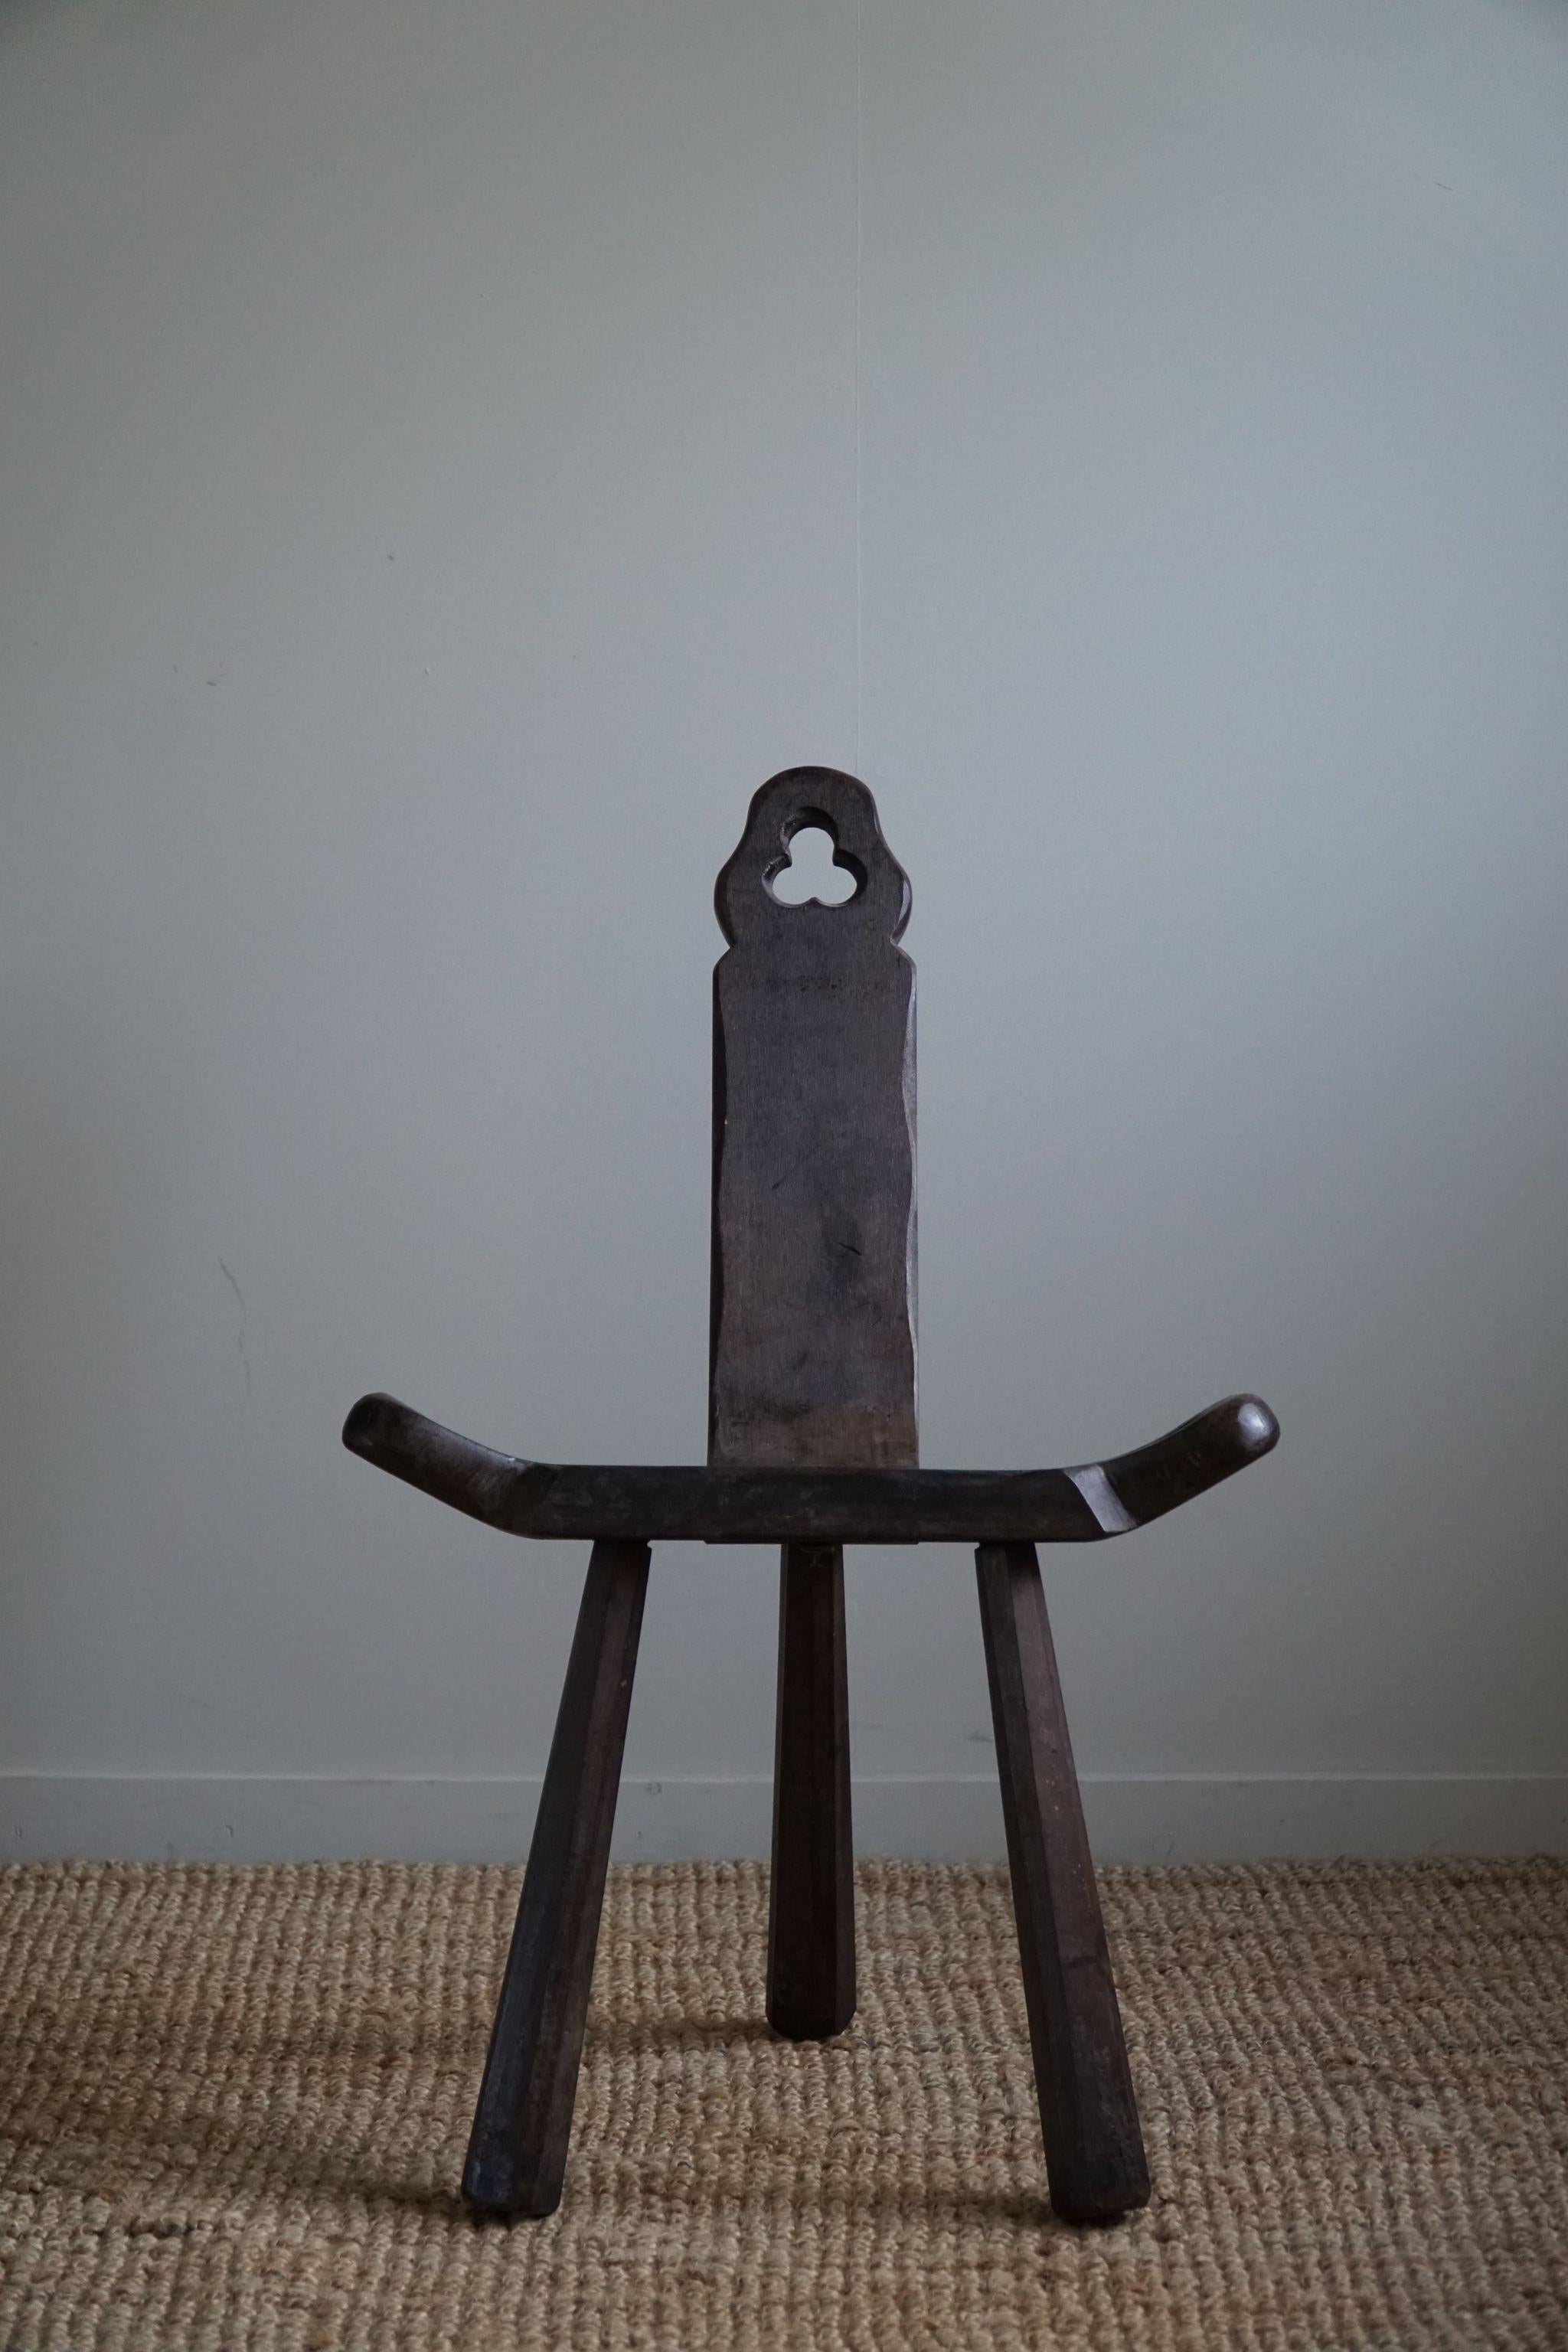 Primitive French Wooden Carved Tripod Chair, Wabi Sabi Style, Early 20th Century For Sale 1